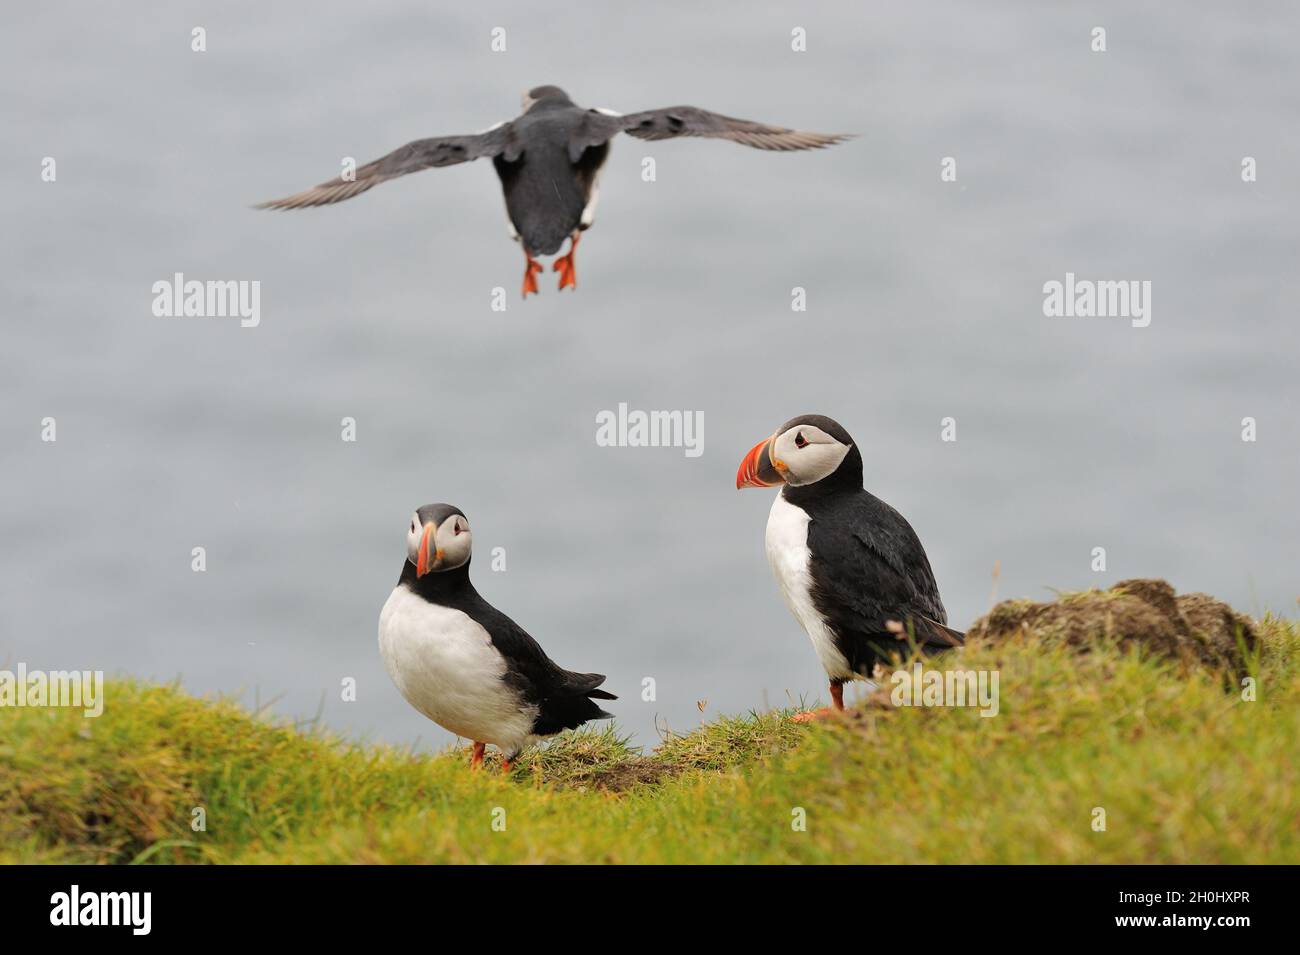 Puffin, Iceland, Westman Islands. Atlantic puffin. Puffins in the rain. Stock Photo